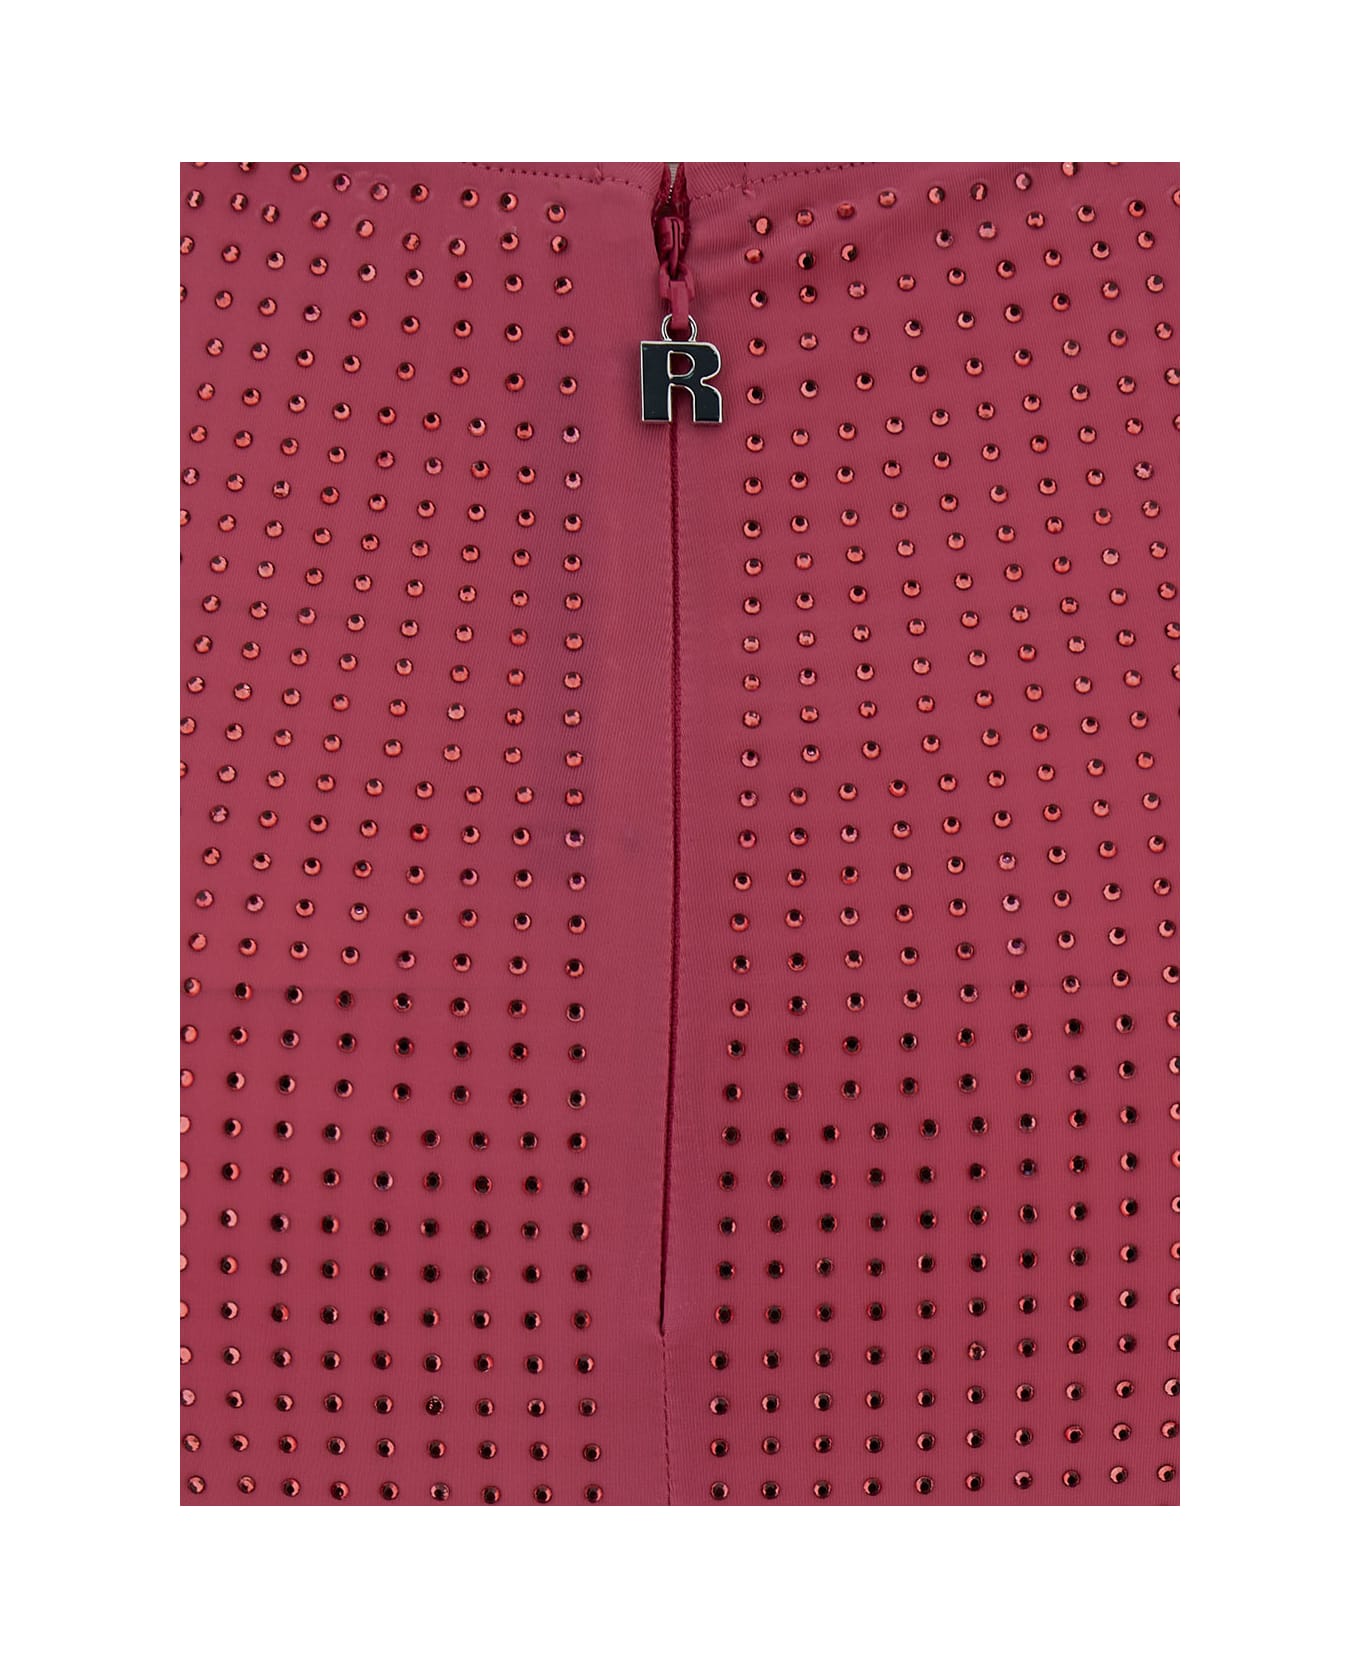 Rotate by Birger Christensen Red Maxi Dress With Rhinestone Embellishment In Stretch Fabric Woman - PINK